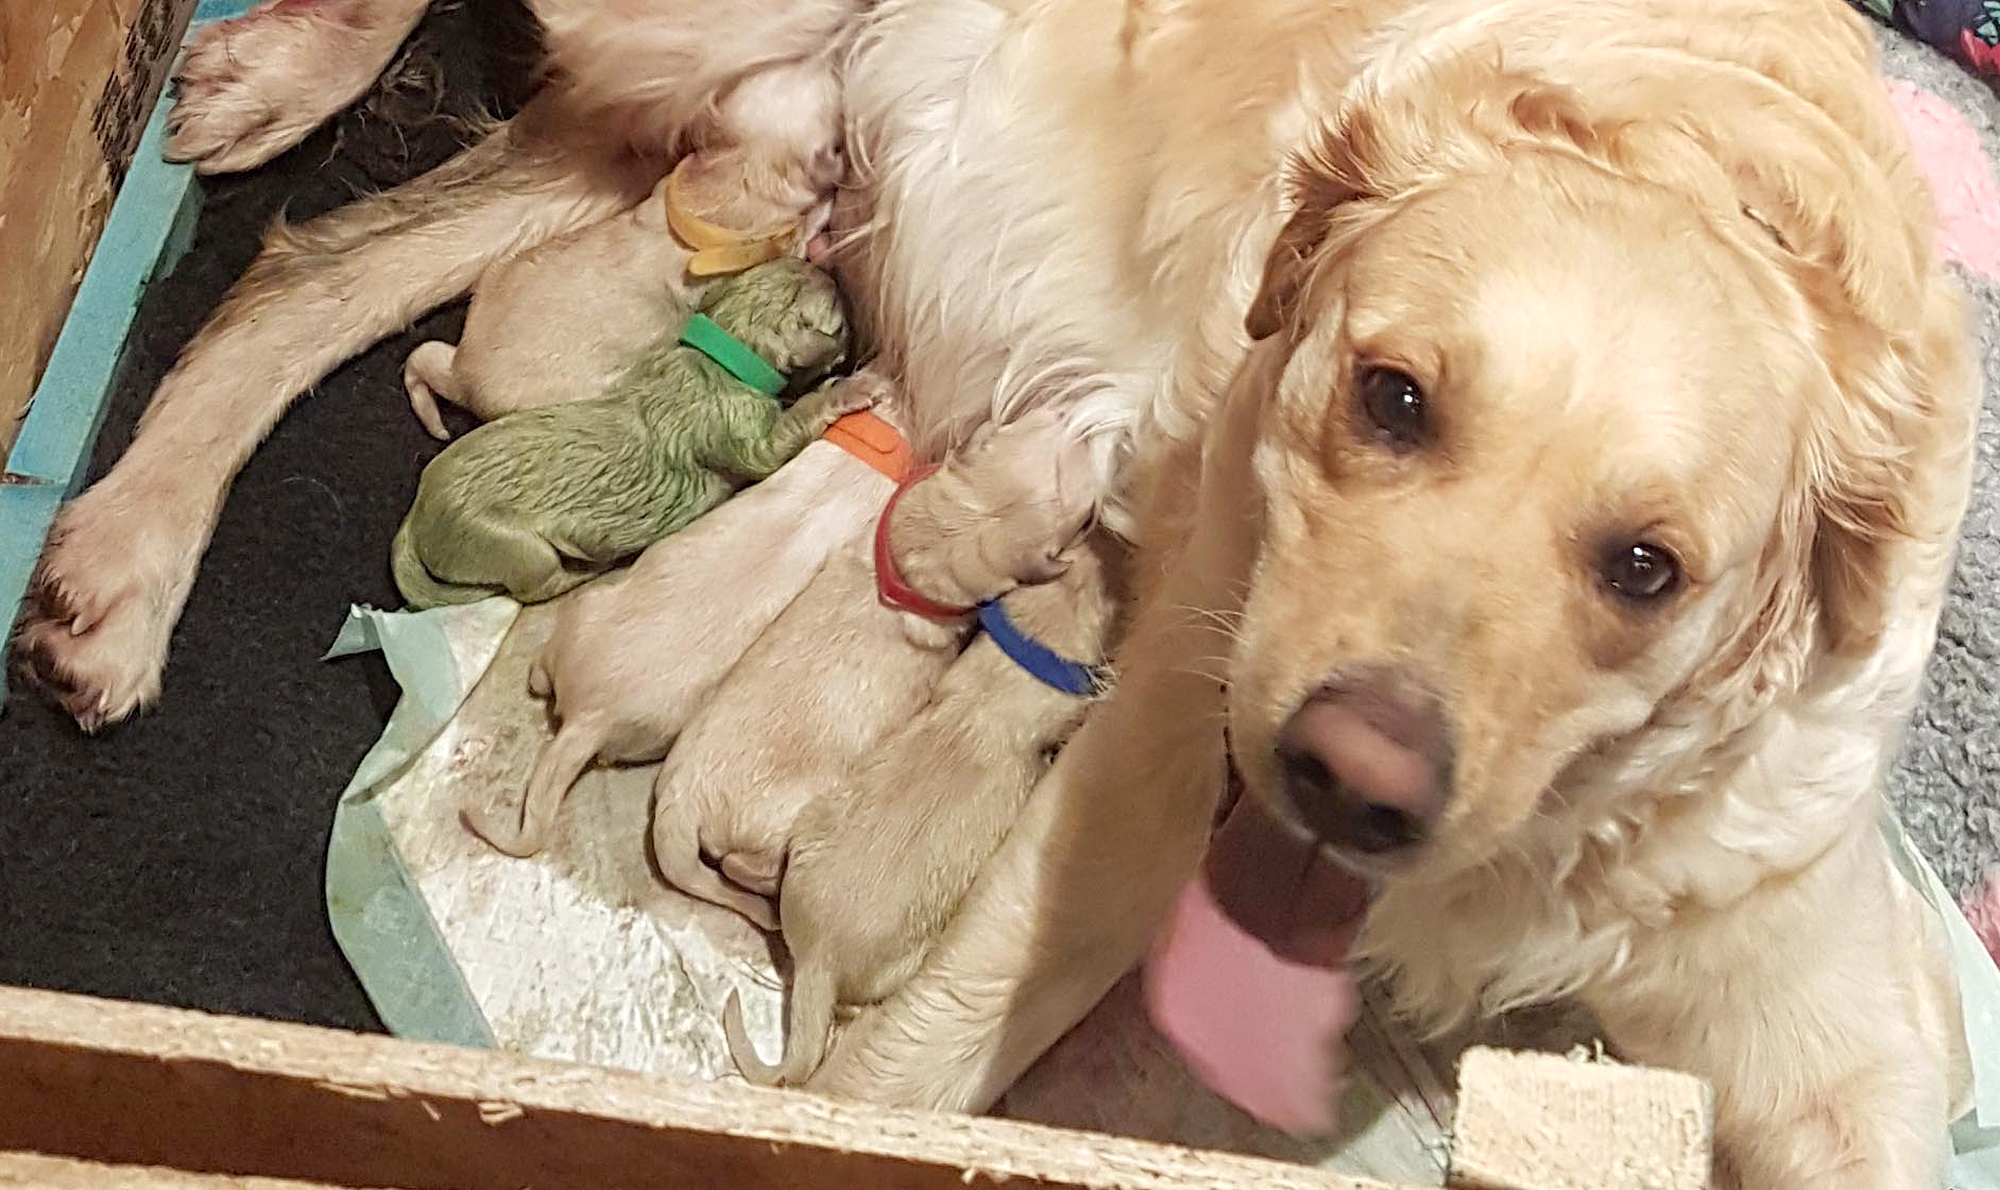  A Golden Retriever mother dog lying with her newborn puppies, who have green fur.